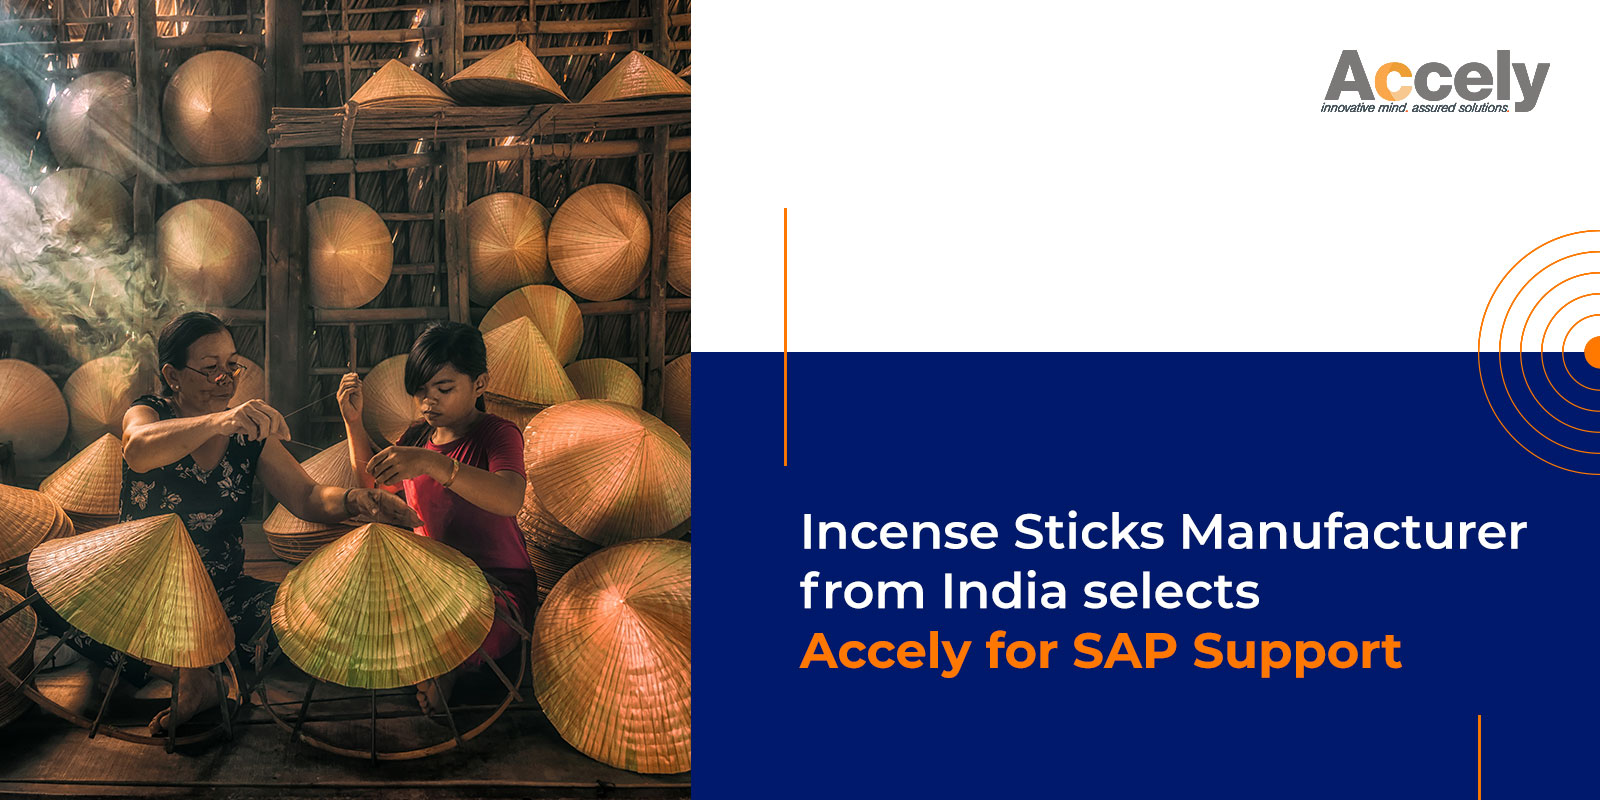 India’s leading Incense Sticks manufacturer joins hands with Accely for SAP Support